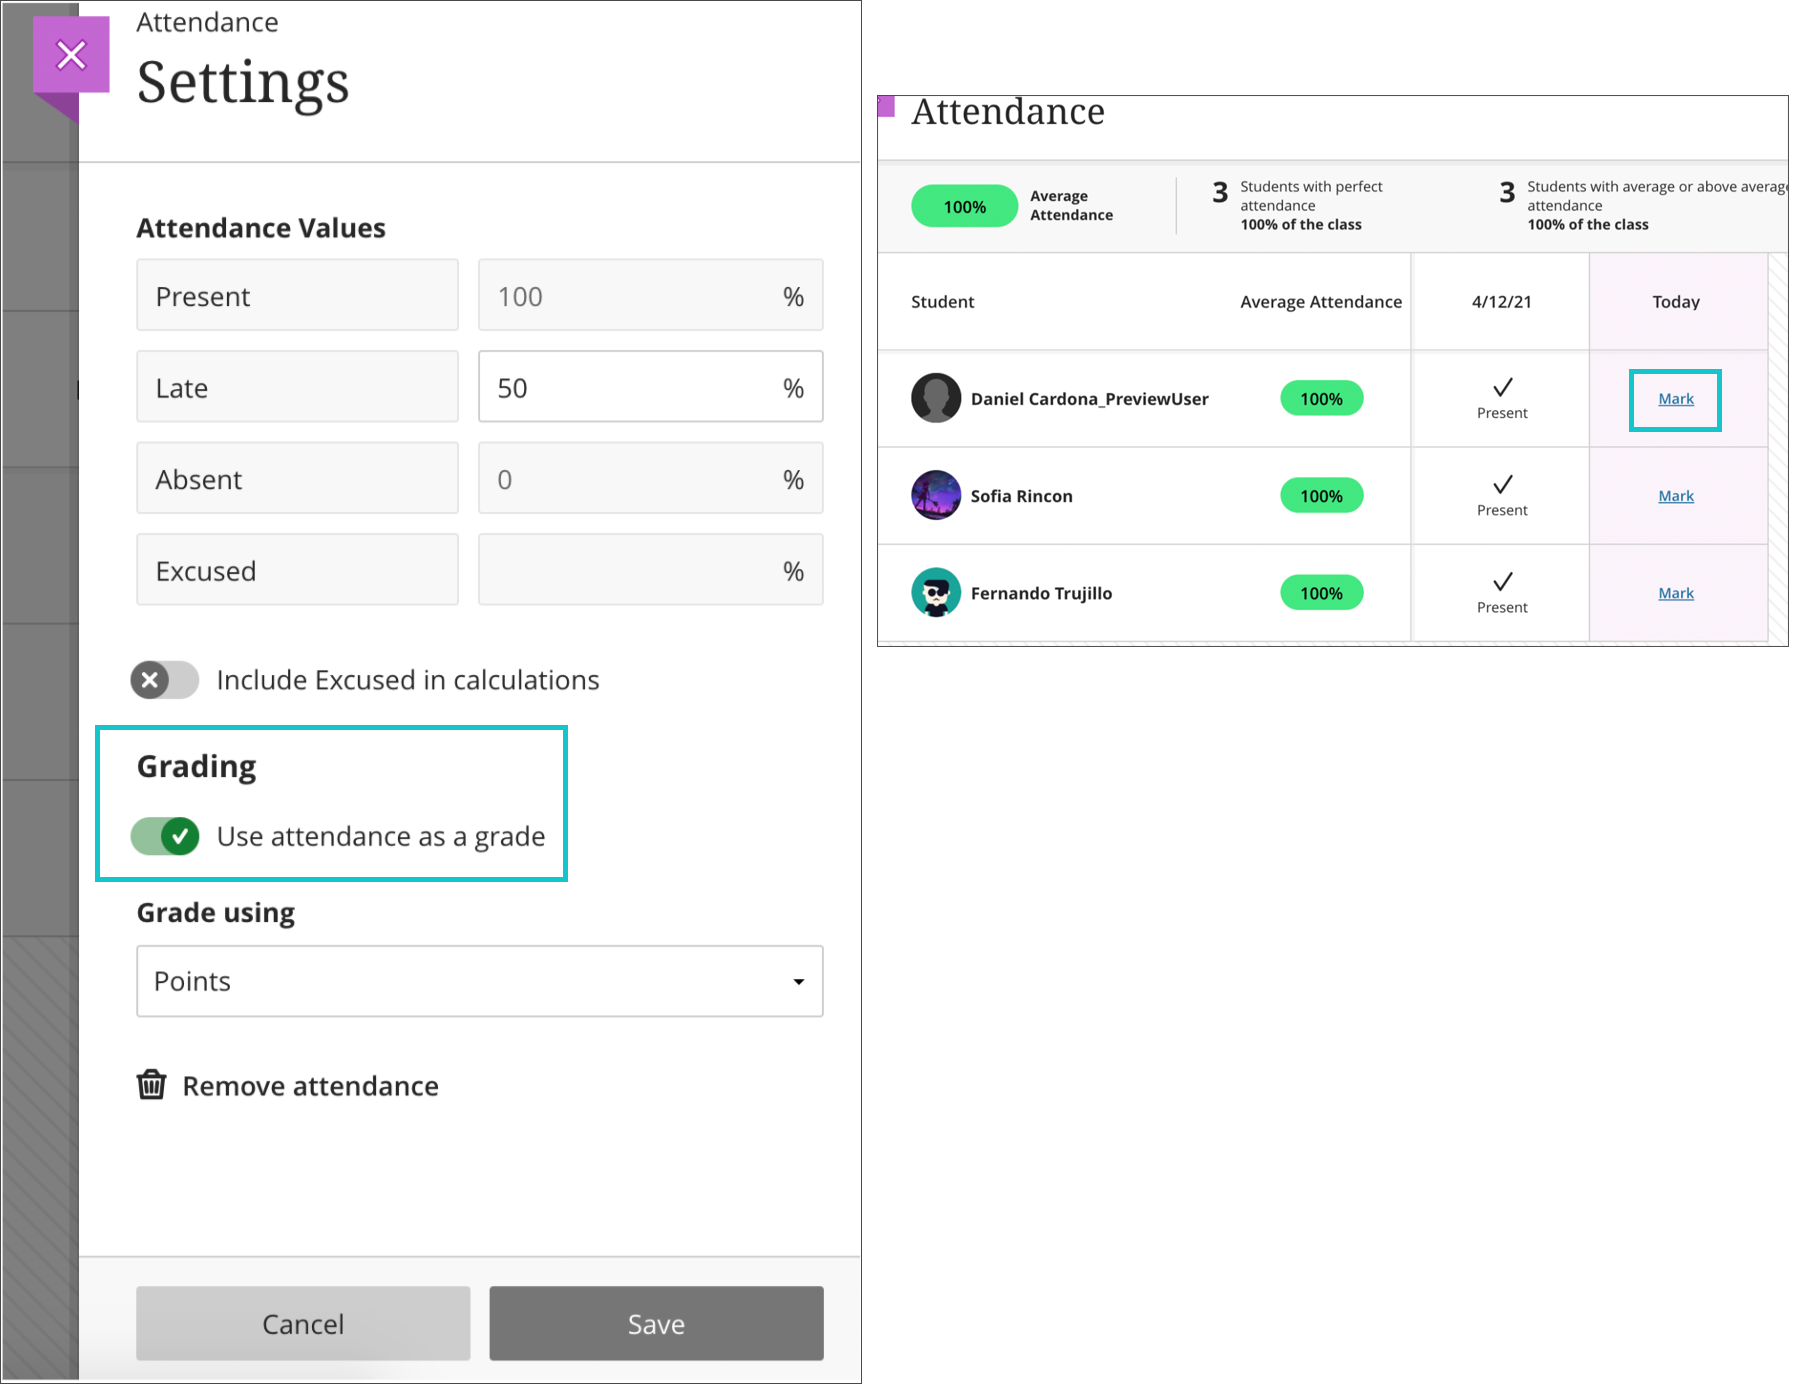 On the left, the Attendance settings panel is open with the "Use attendance as grade" option enabled. On the right, the Attendance page is open with the "Mark" option highlighted 